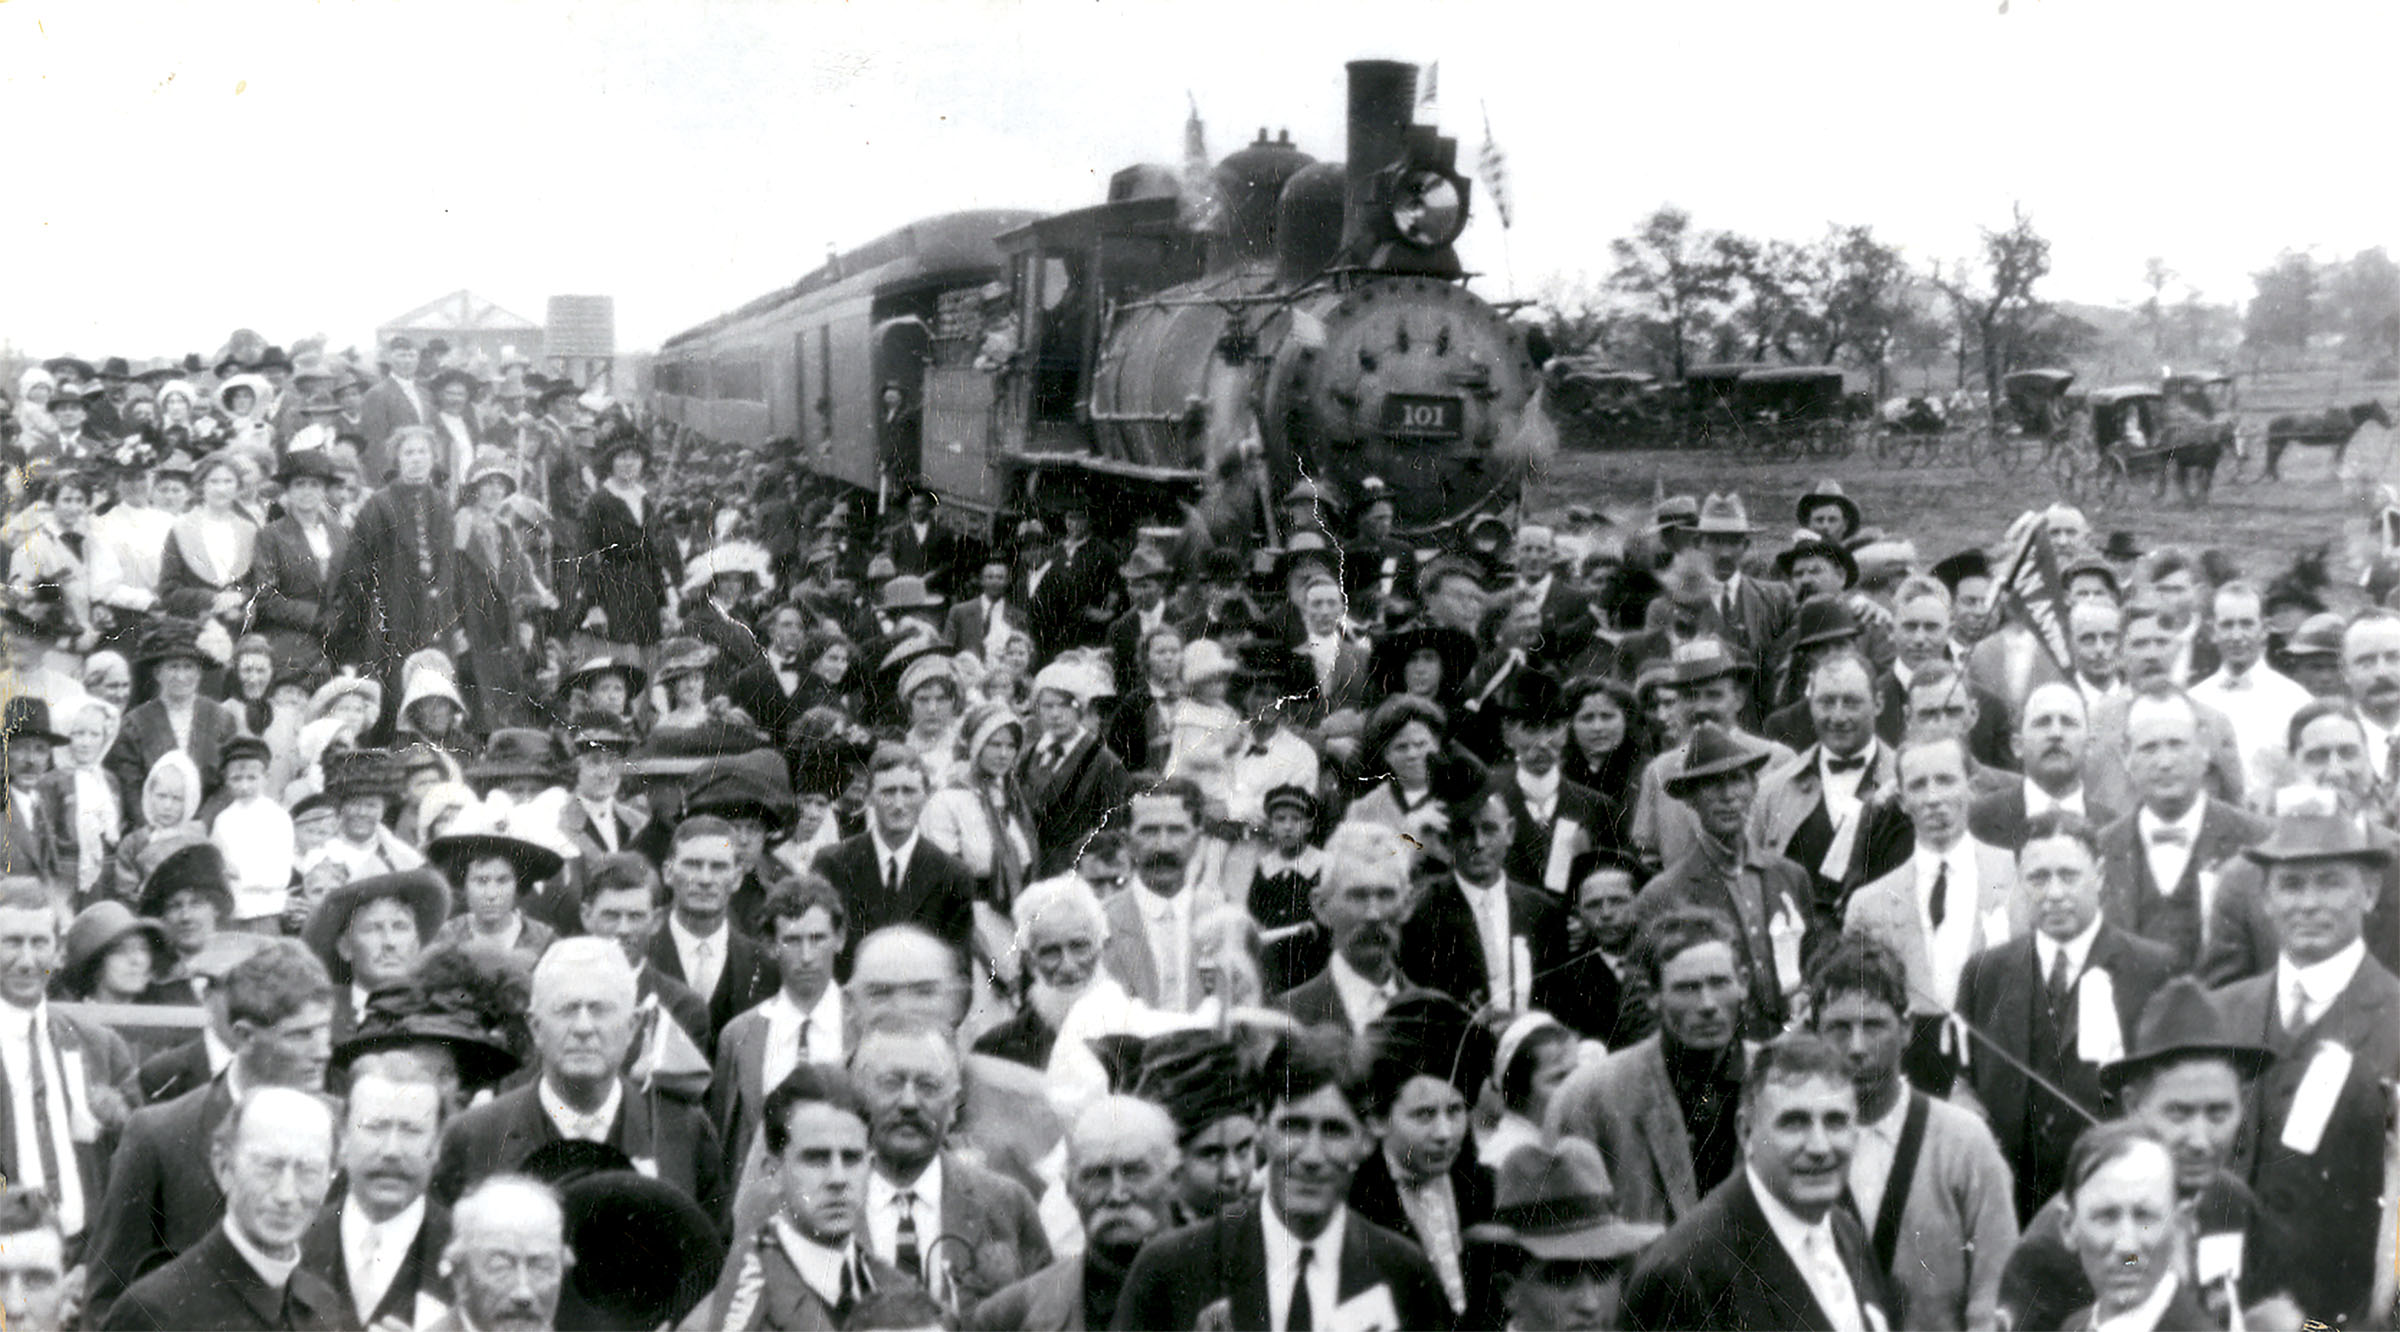 A large crowd of people, dressed in suits, ties and hats, stand in front of a locomotive in this black and white photograph